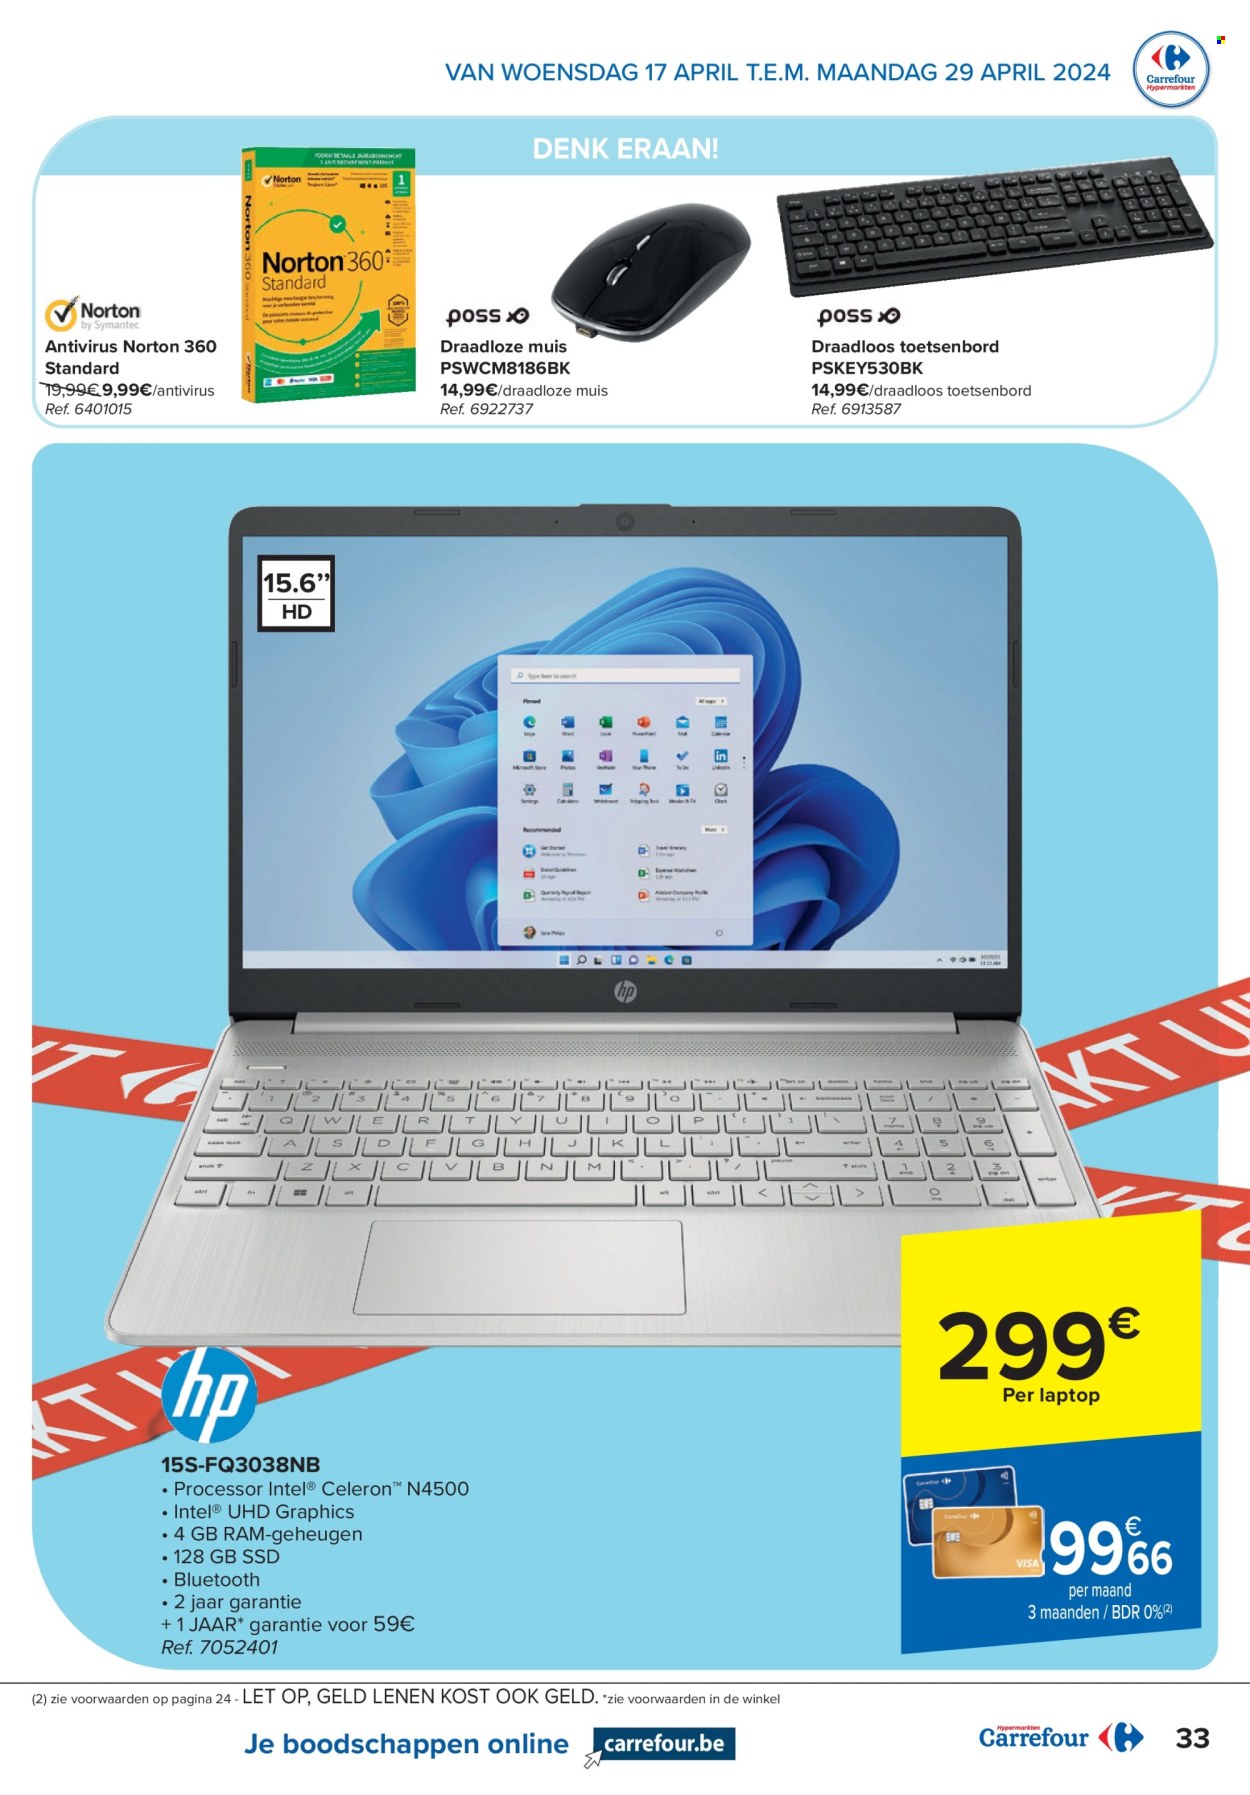 Catalogue Carrefour hypermarkt - 17.4.2024 - 29.4.2024. Page 33.